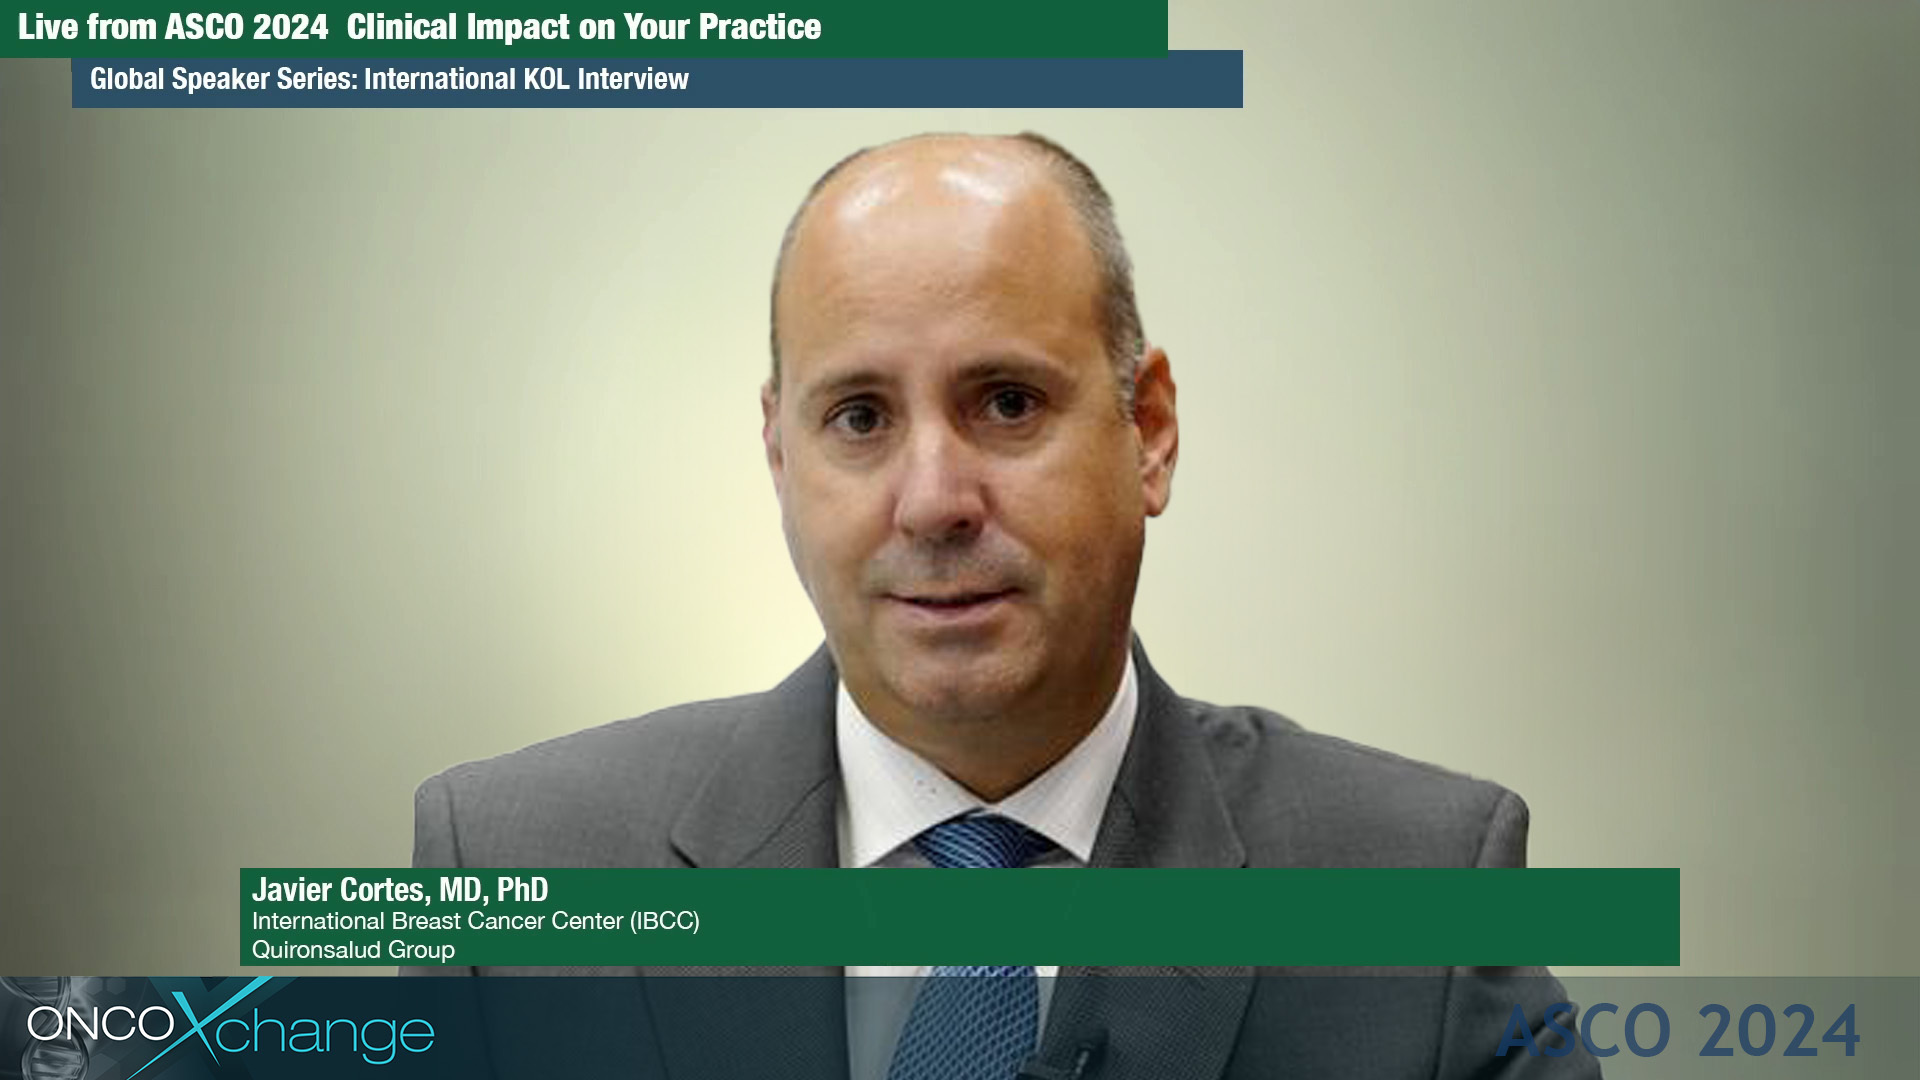 ASCO 2024 - Global Speaker Series - Dr. Javier Cortés reviews key insights from the PEARLY trial, A-BRAVE, and I-SPY 2.2 abstracts